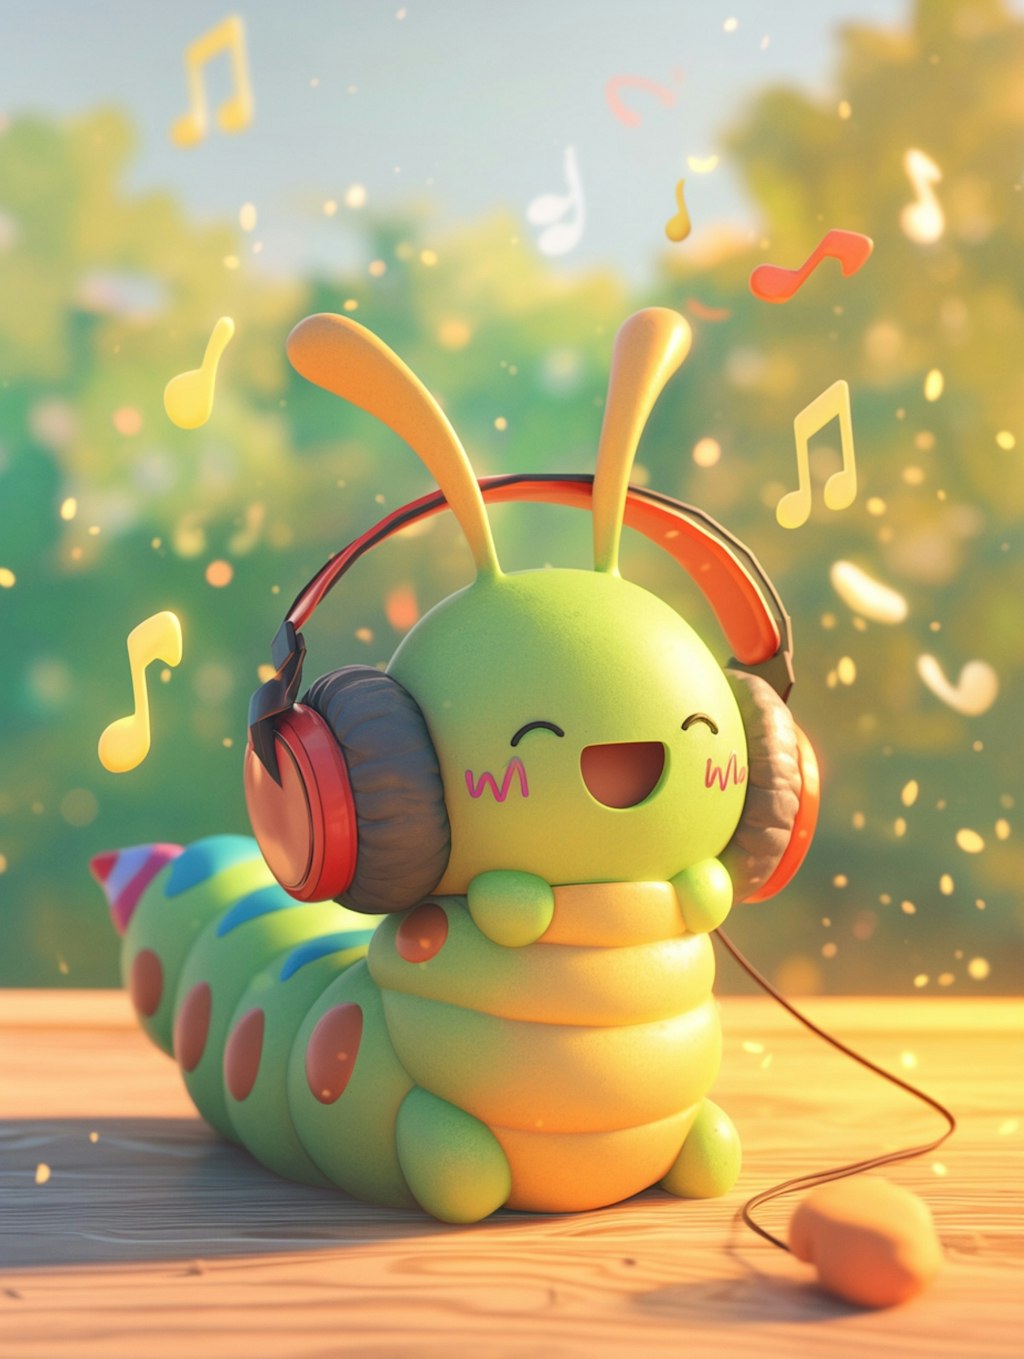 Let's dance to the music!